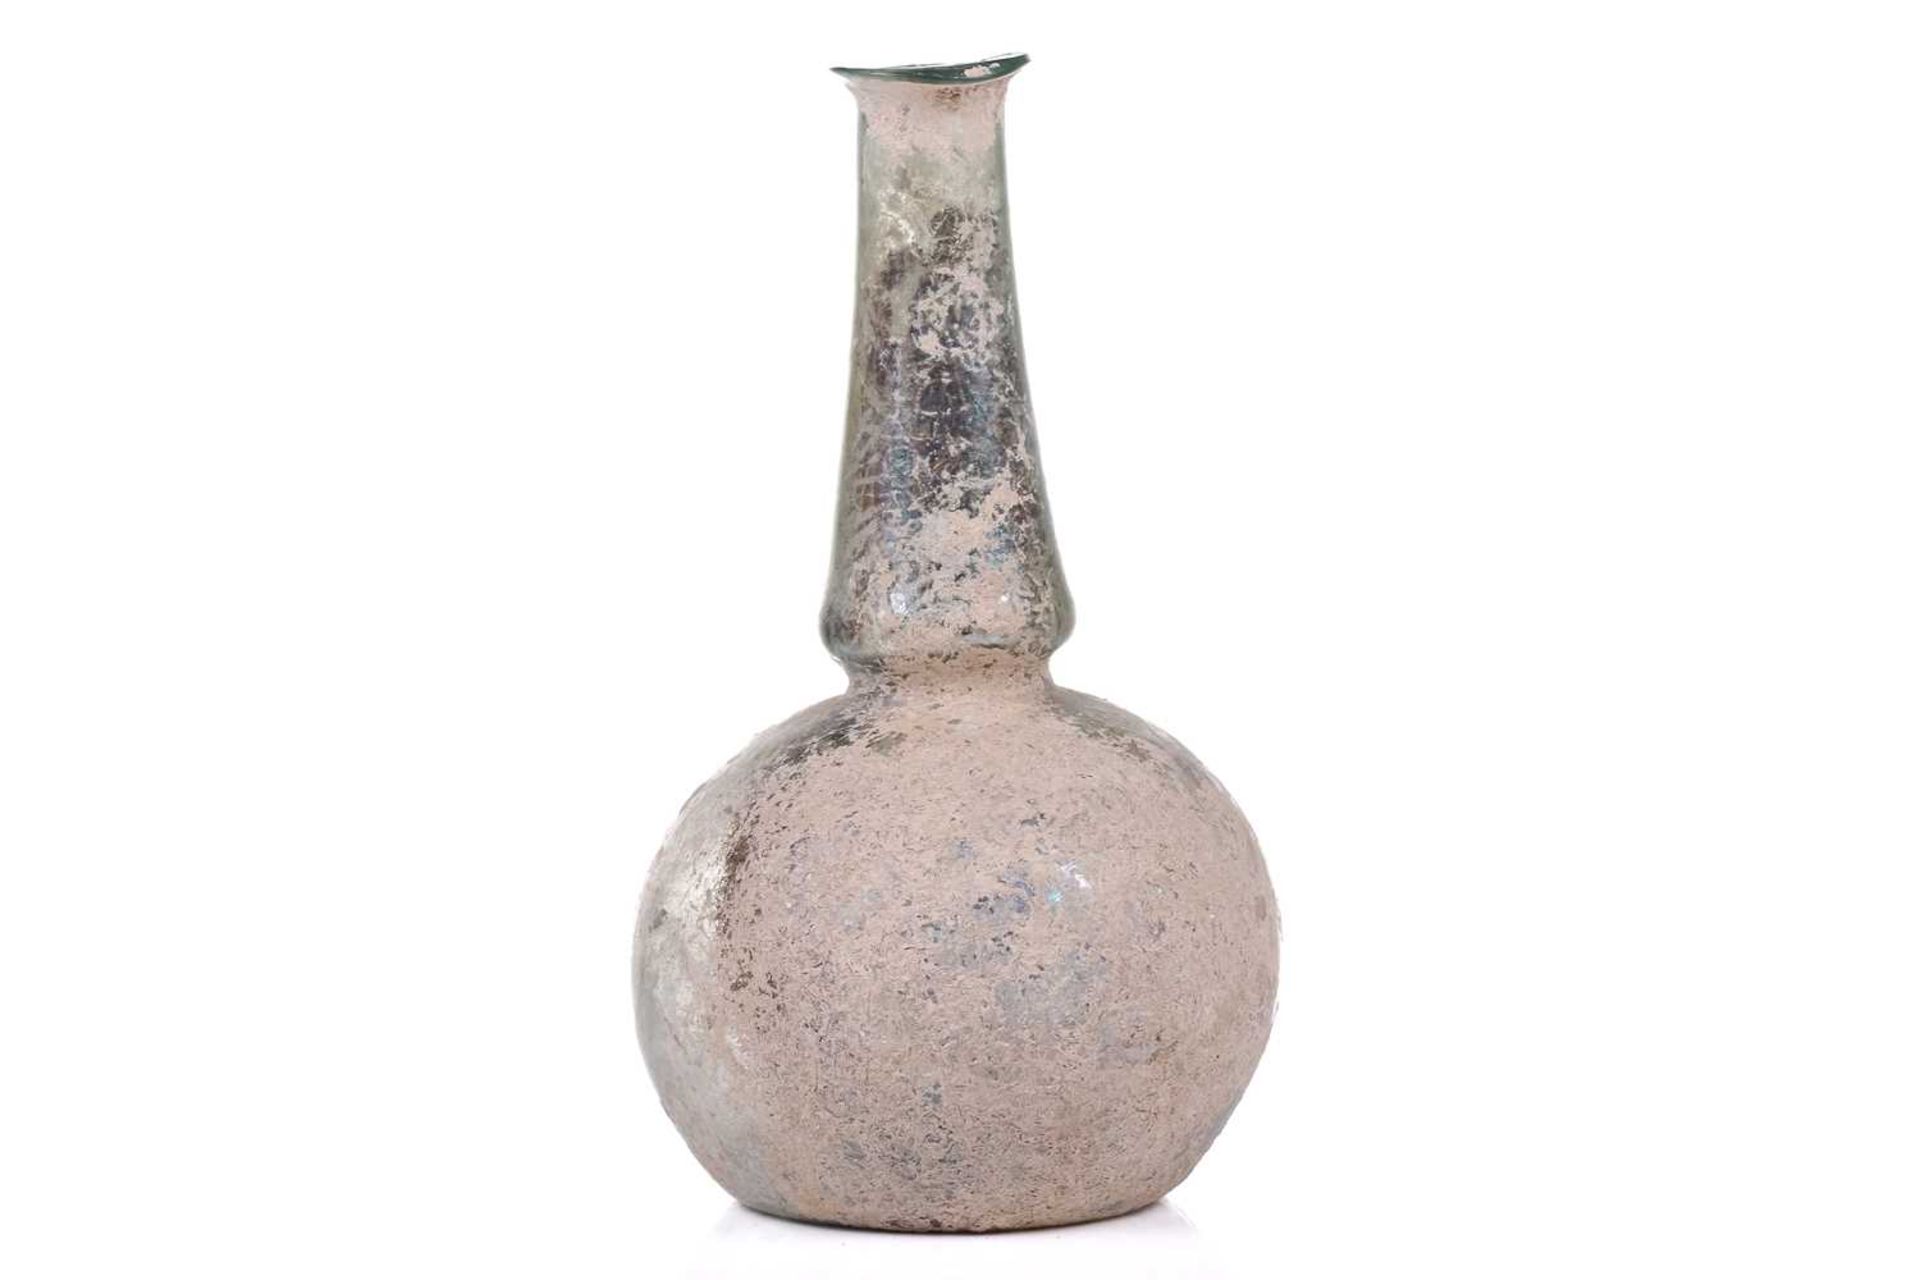 A Roman glass bulbous flask with everted rim, signs of oxidation and encrusted soil to the - Image 6 of 6